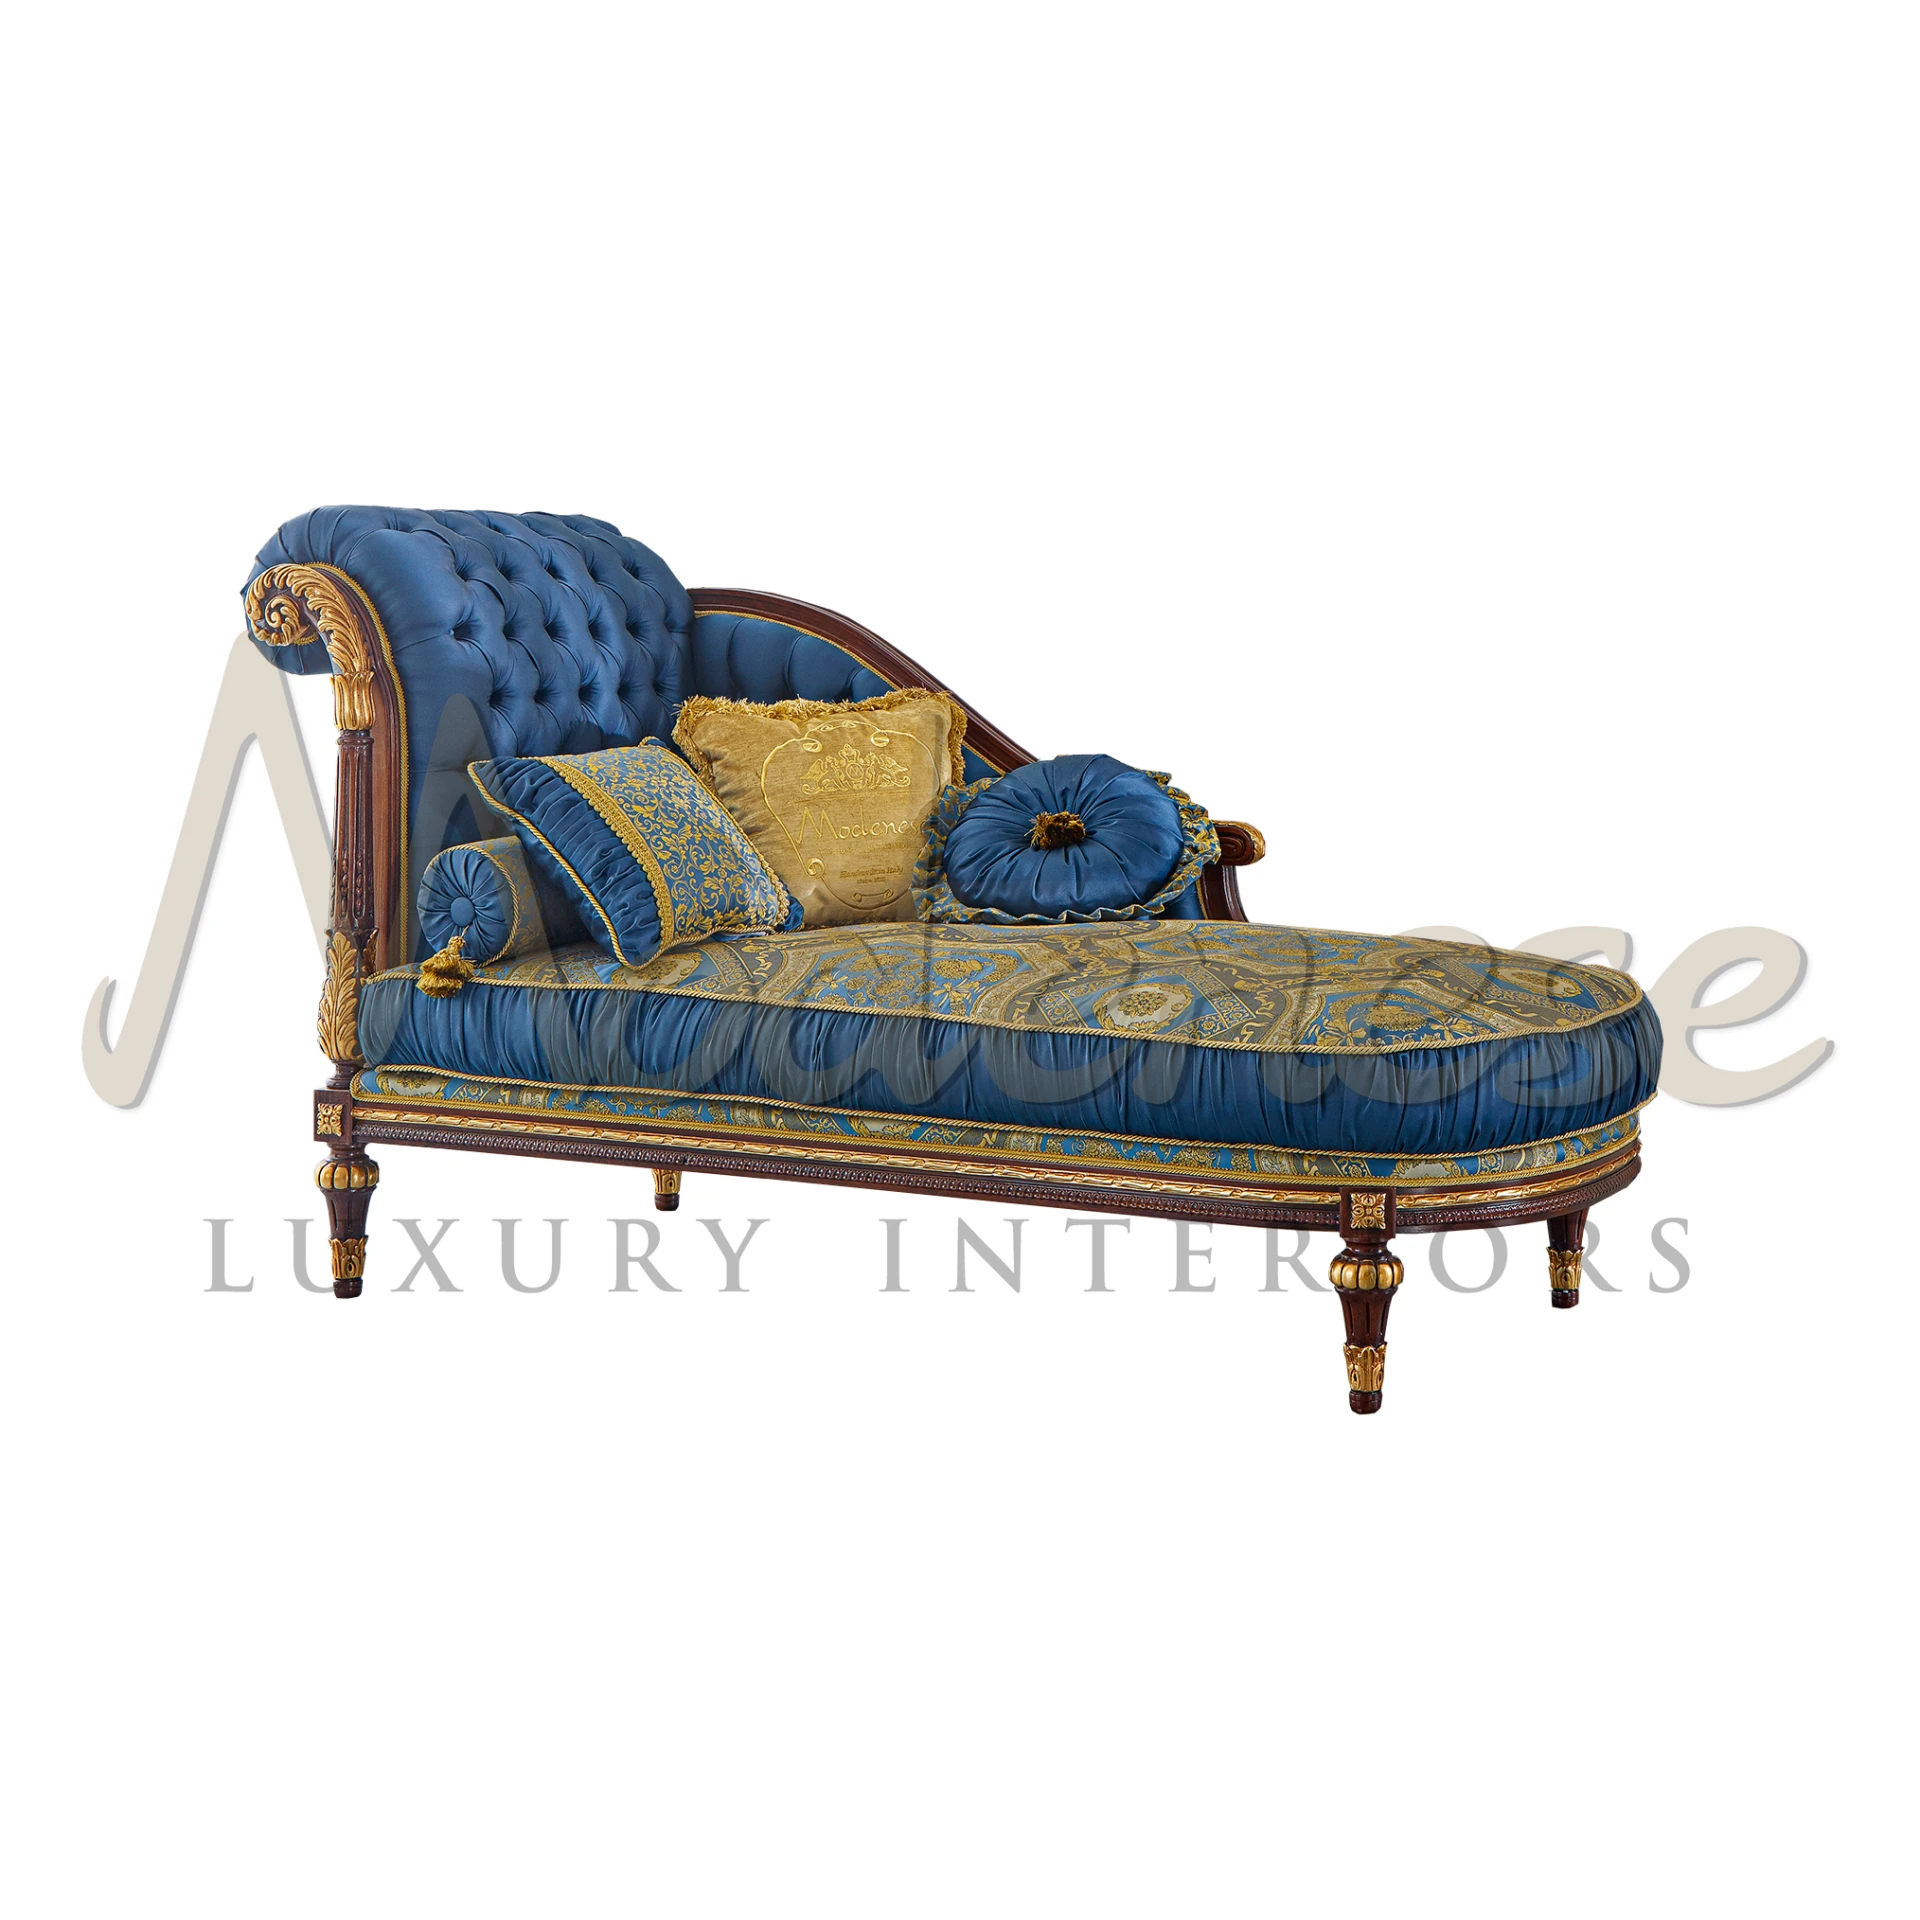 Regal blue tufted chaise lounge with gold patterned upholstery and decorative pillows.                                                                               